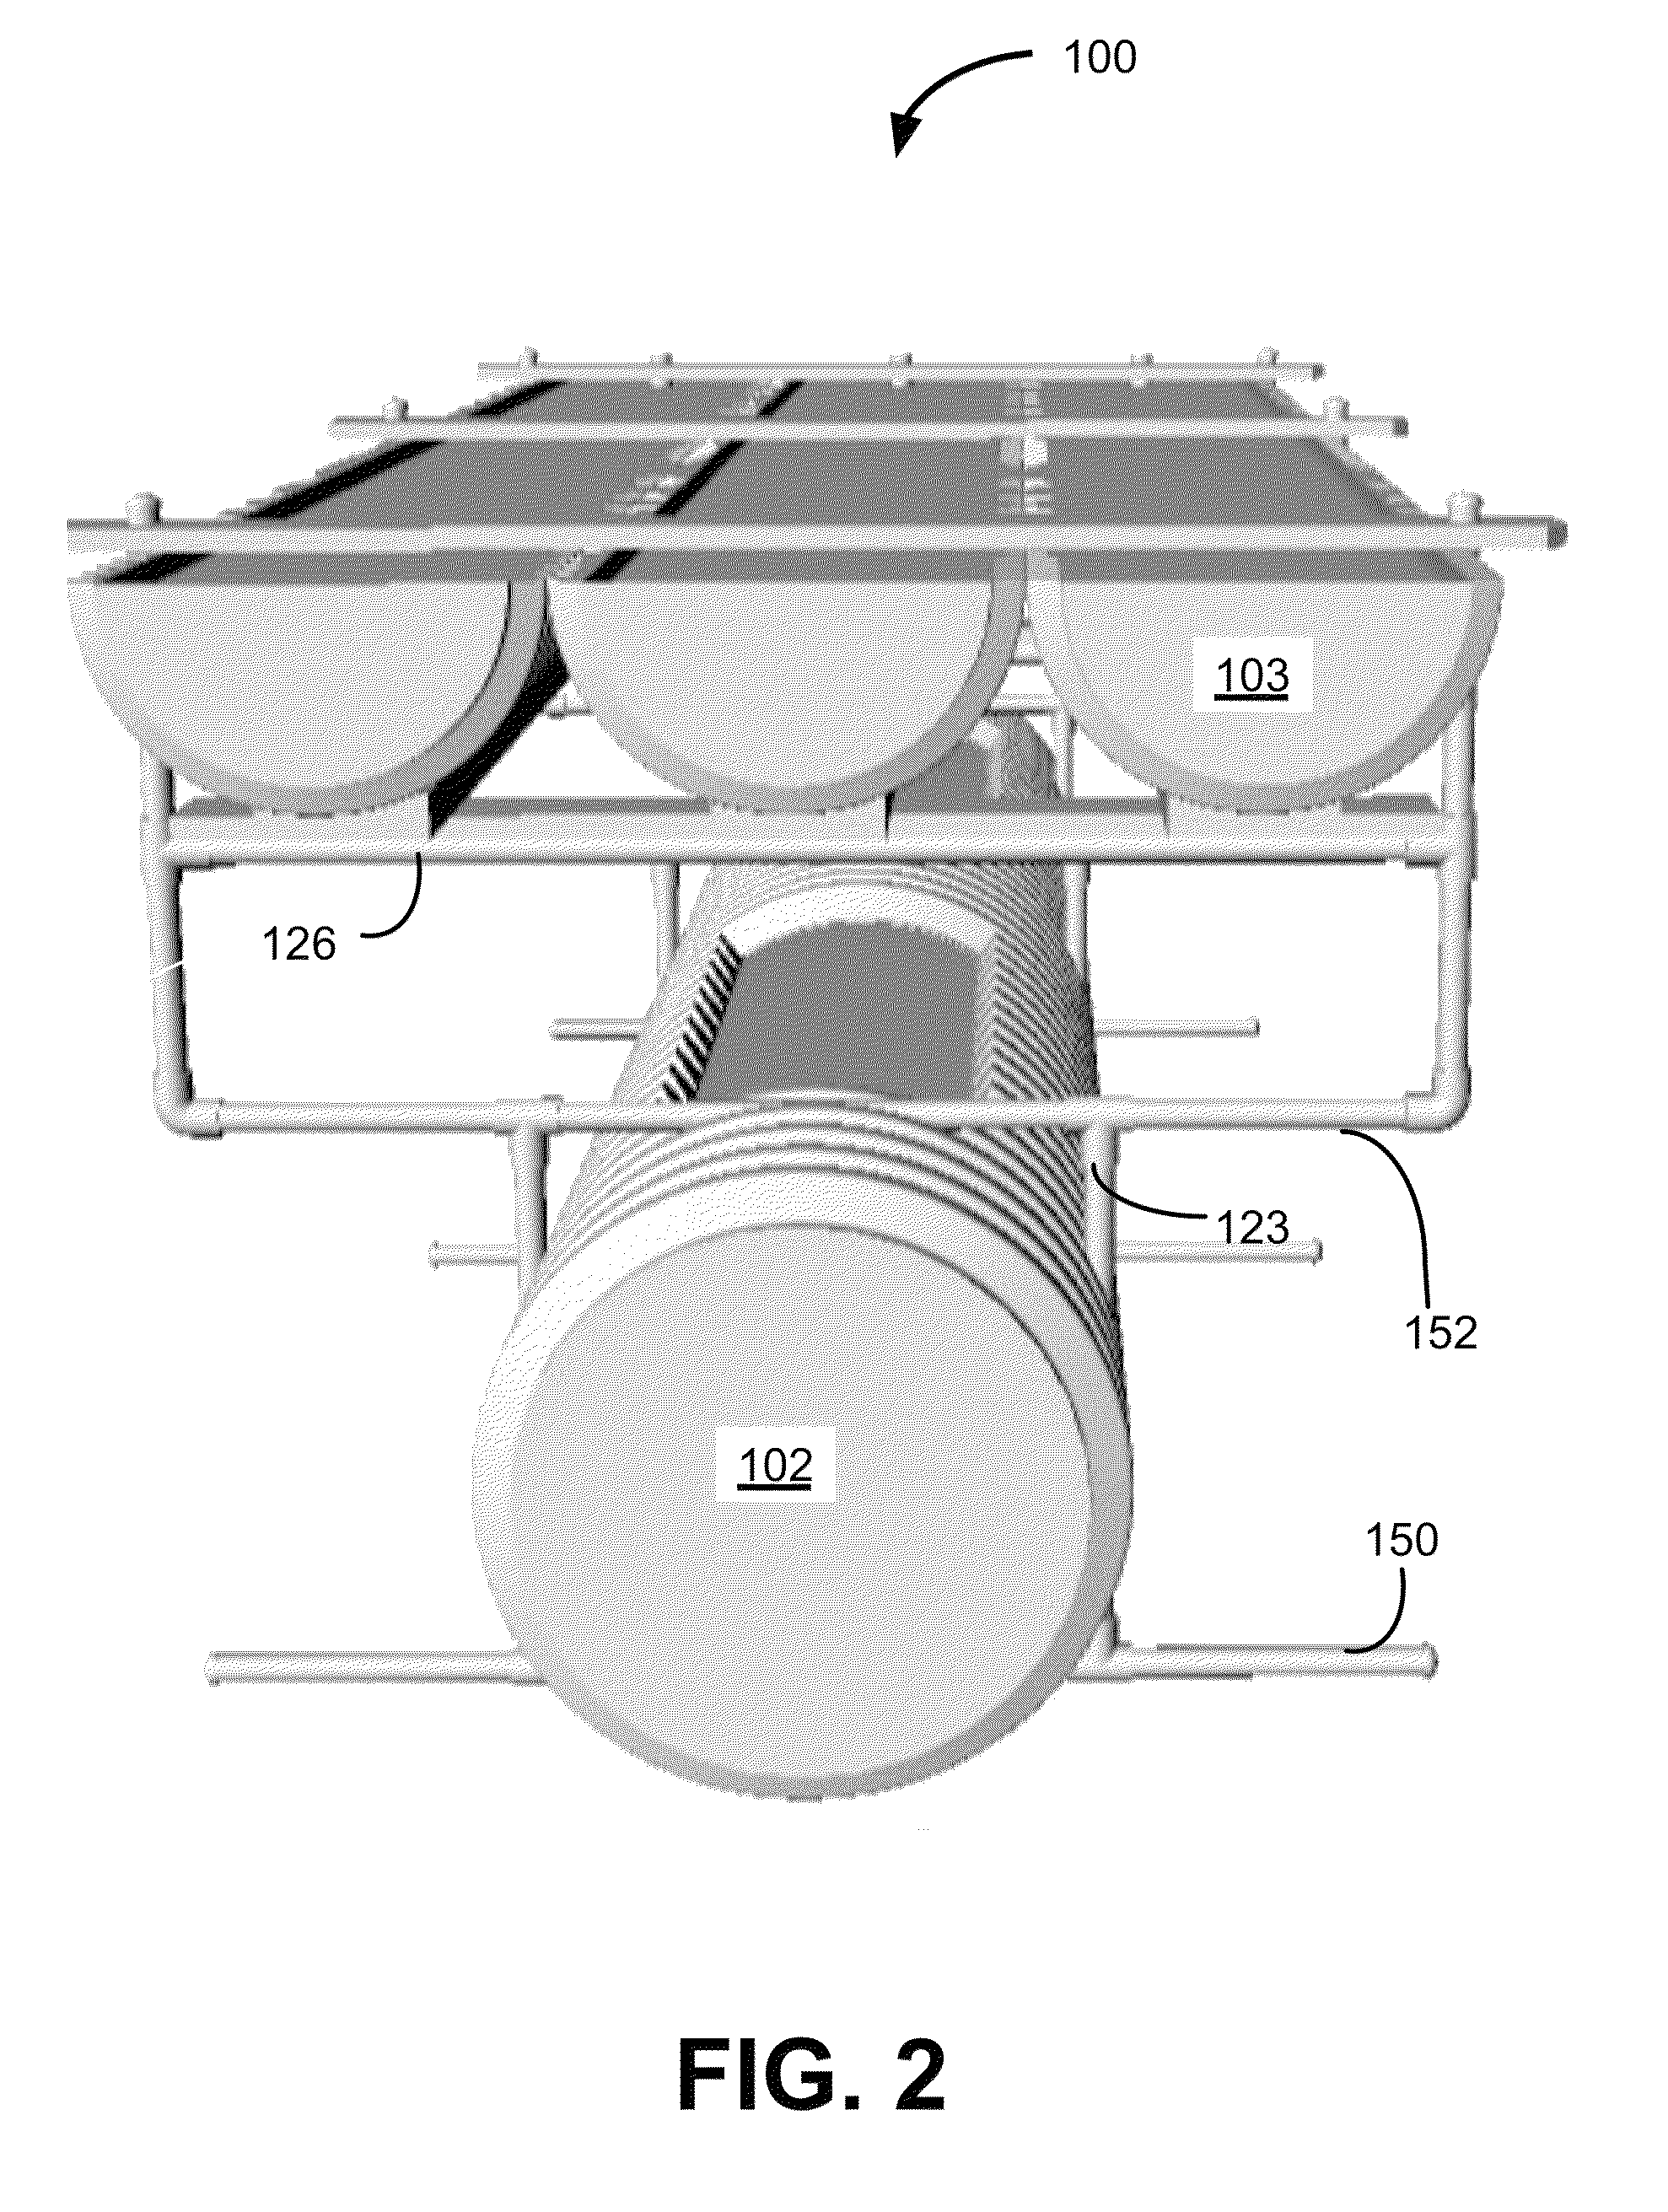 Systems and apparatus for extracting and delivering nutrients from biomass for plant growth